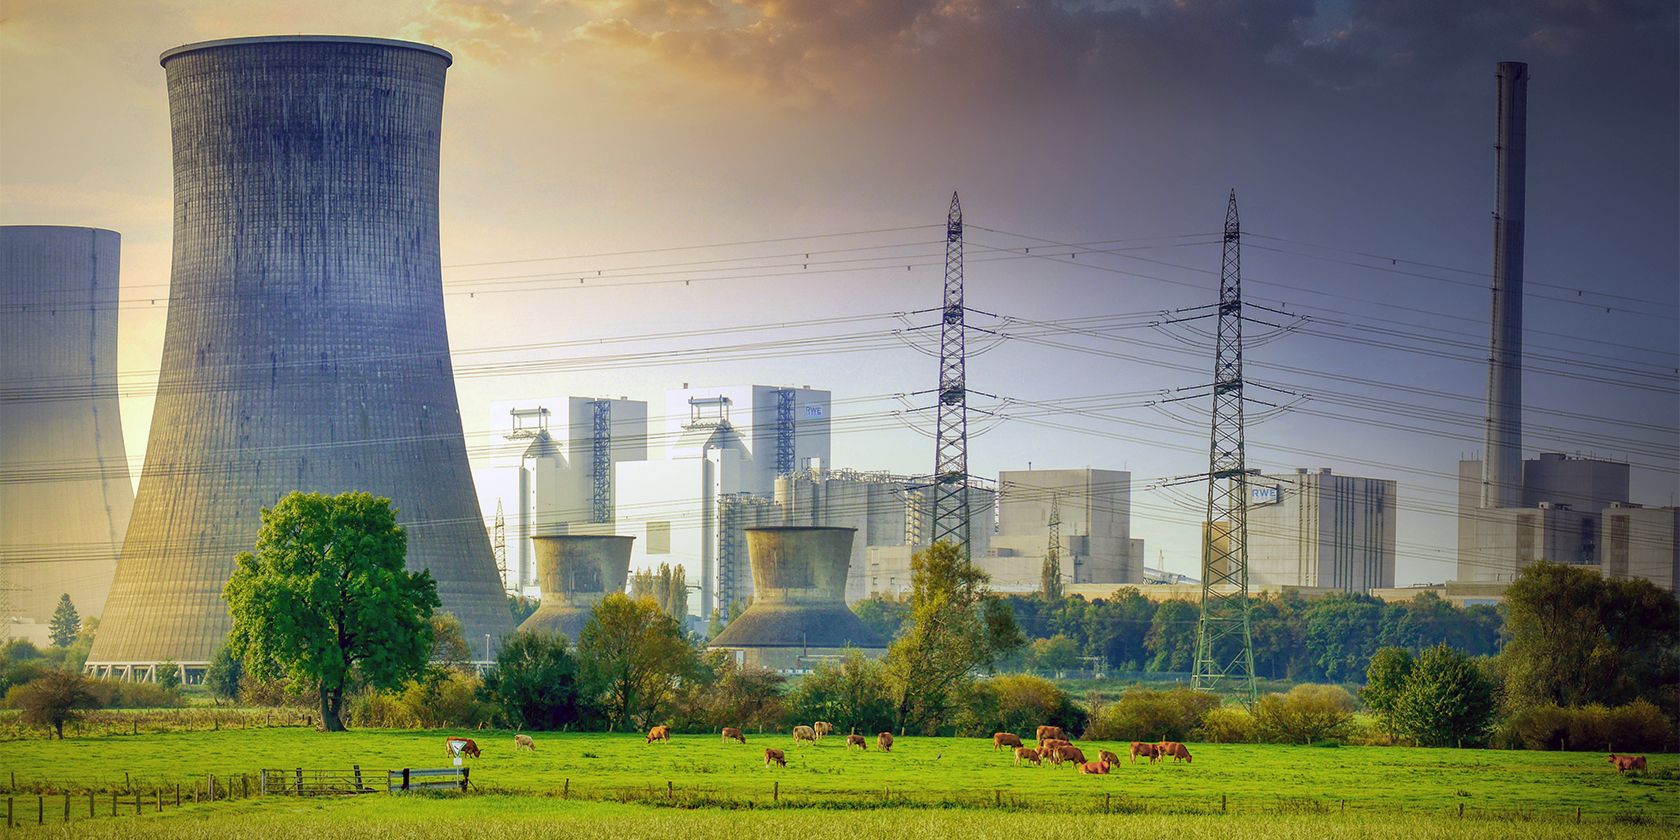 Protecting Critical Infrastructure Like Nuclear Power Plants From Cyberattacks